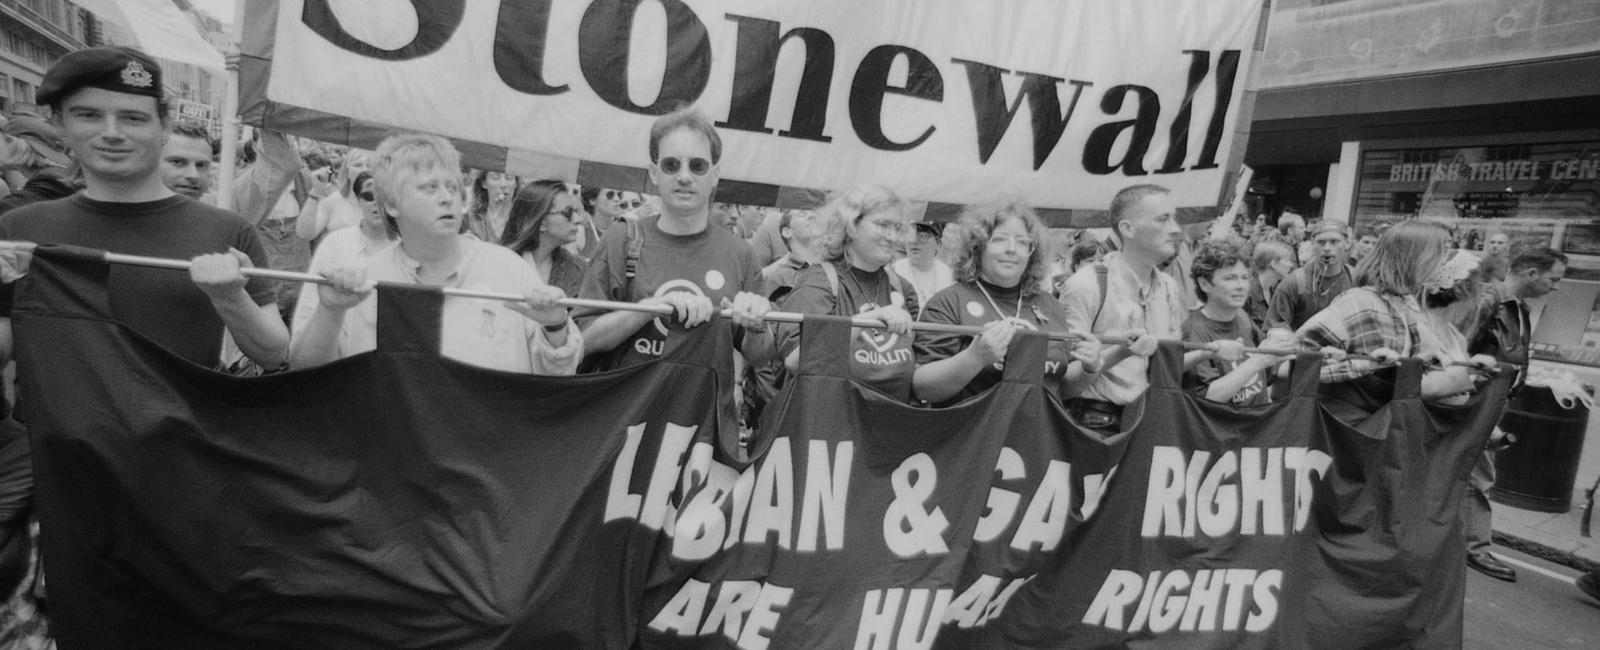 The 1969 stonewall uprising was the start of the lgbtq rights movement